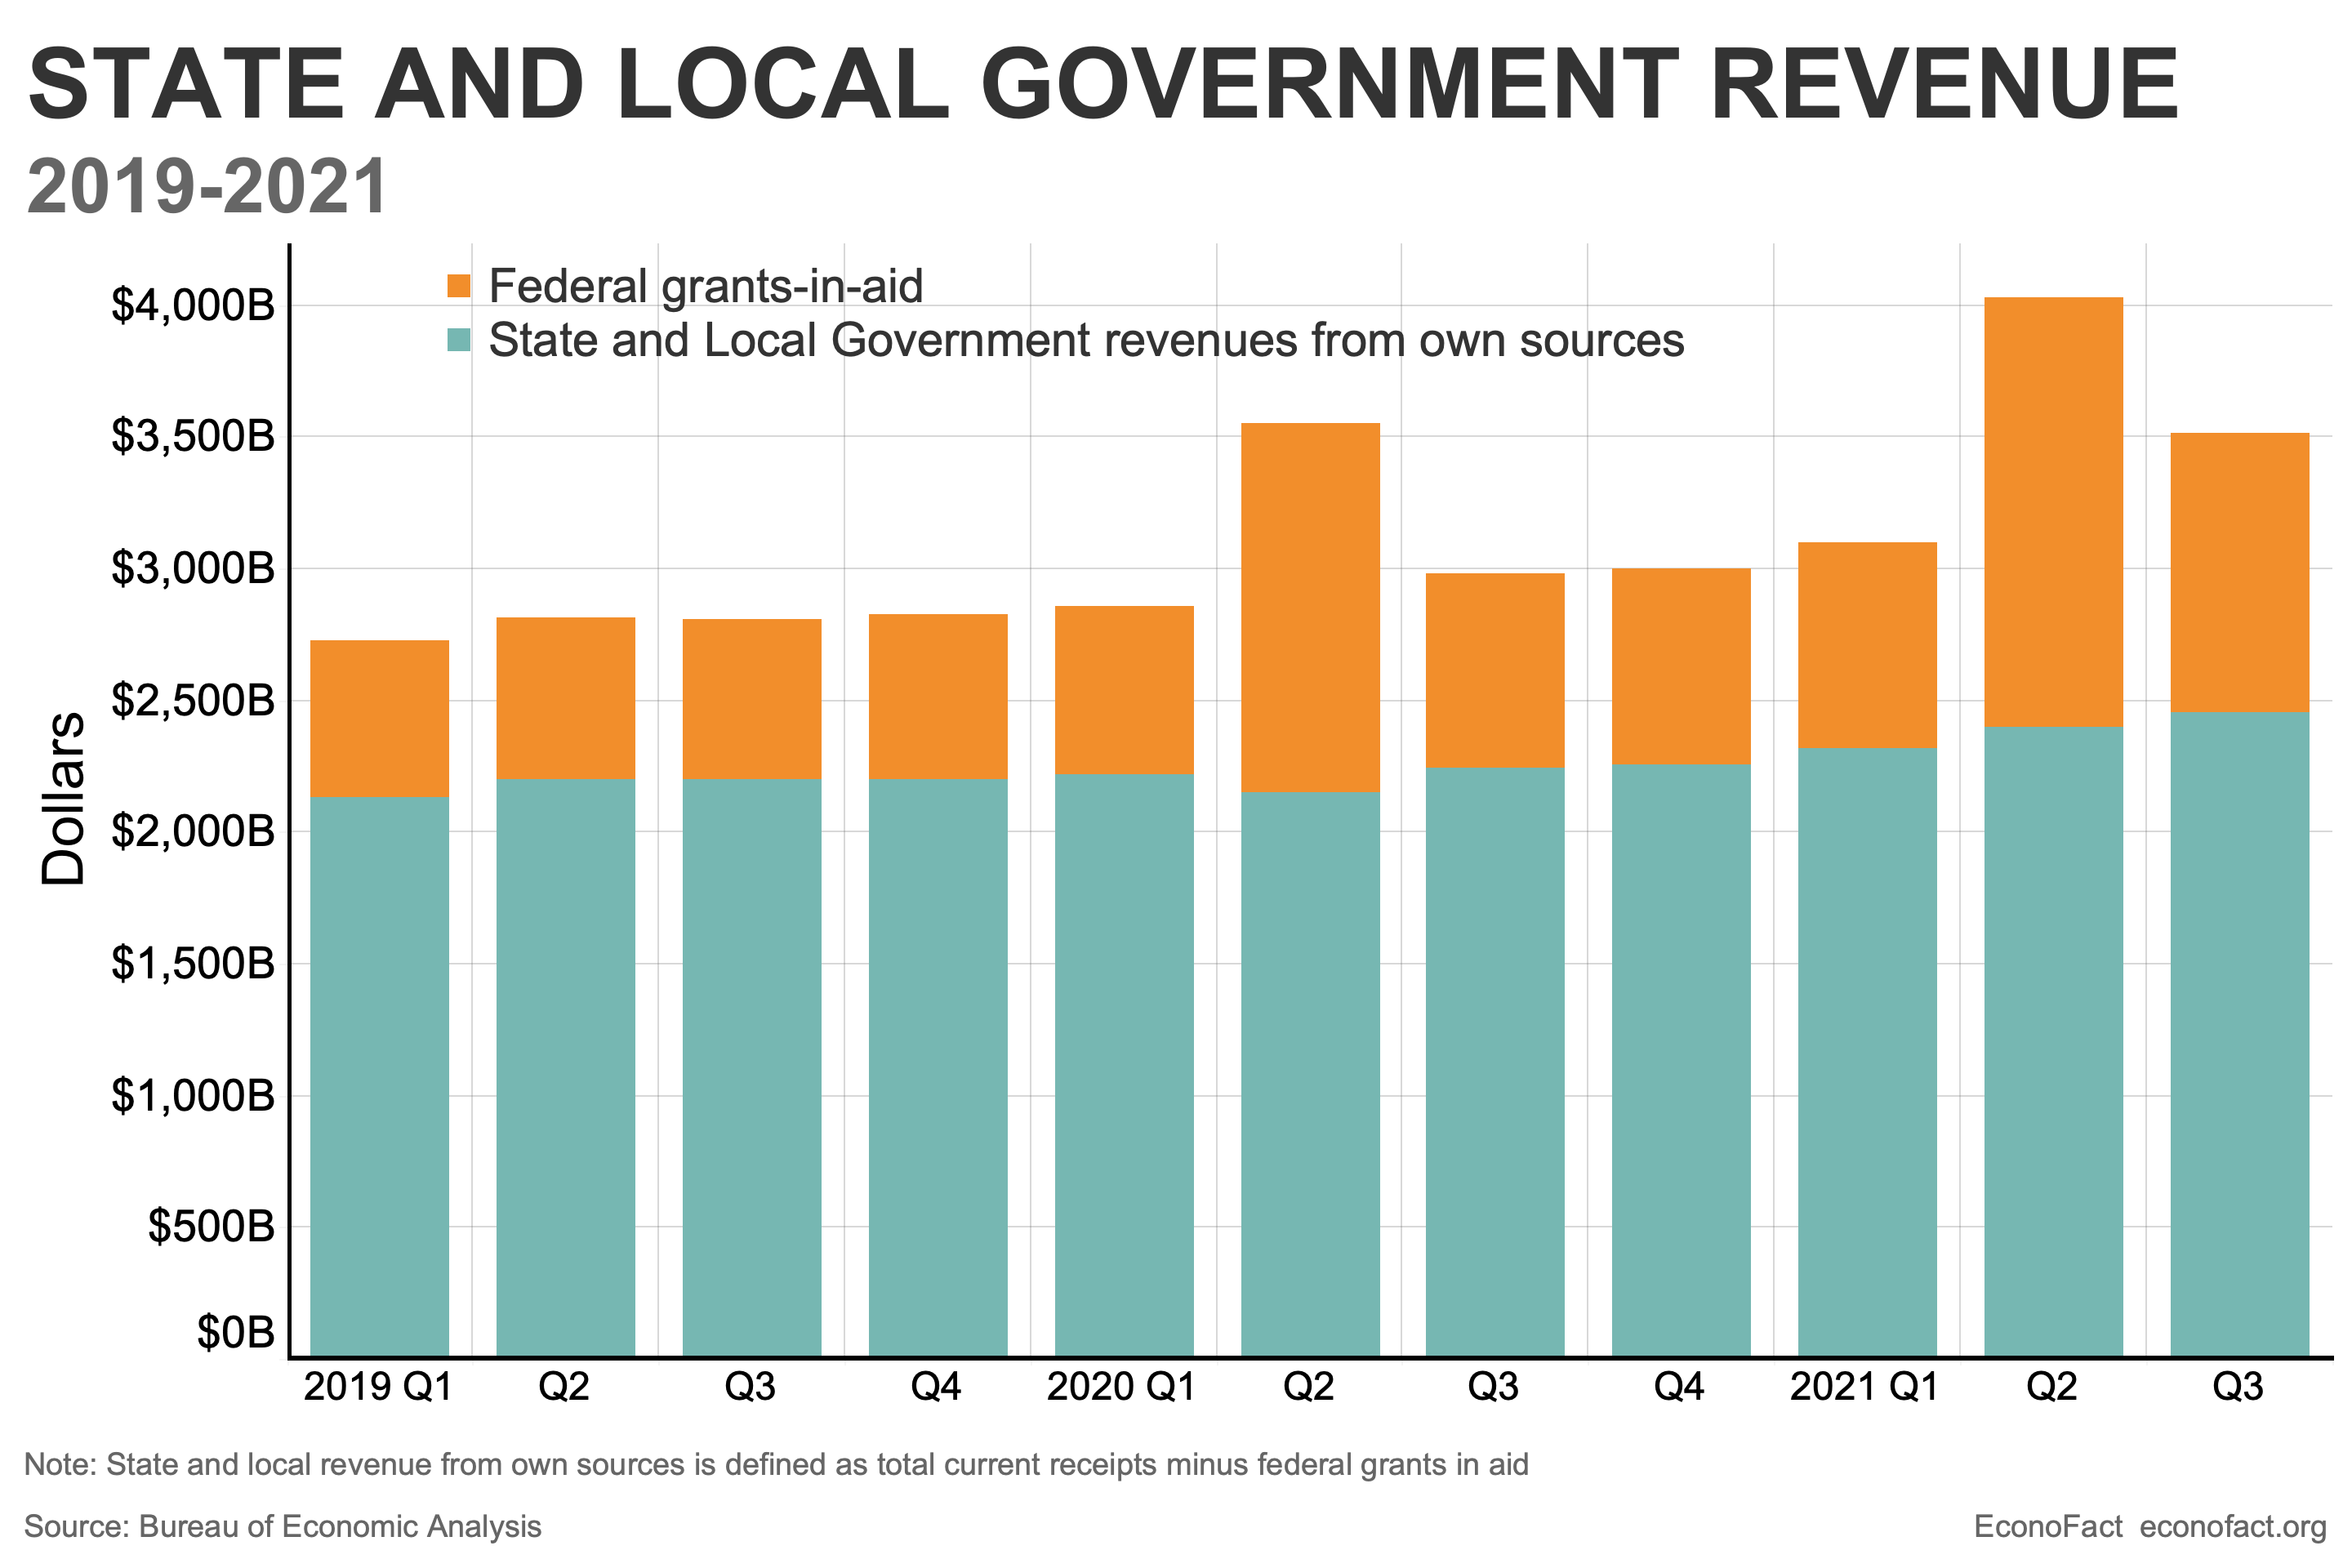 State and Local Government revenue by source for years 2019 through third quarter 2021. Shows that revenue for state and local governments did not crater when the pandemic began and while revenues from own sources increased modestly, federal grants-in-aid added significant revenue to state and local governments, especially during the second quarter of 2020 and the second quarter of 2021.